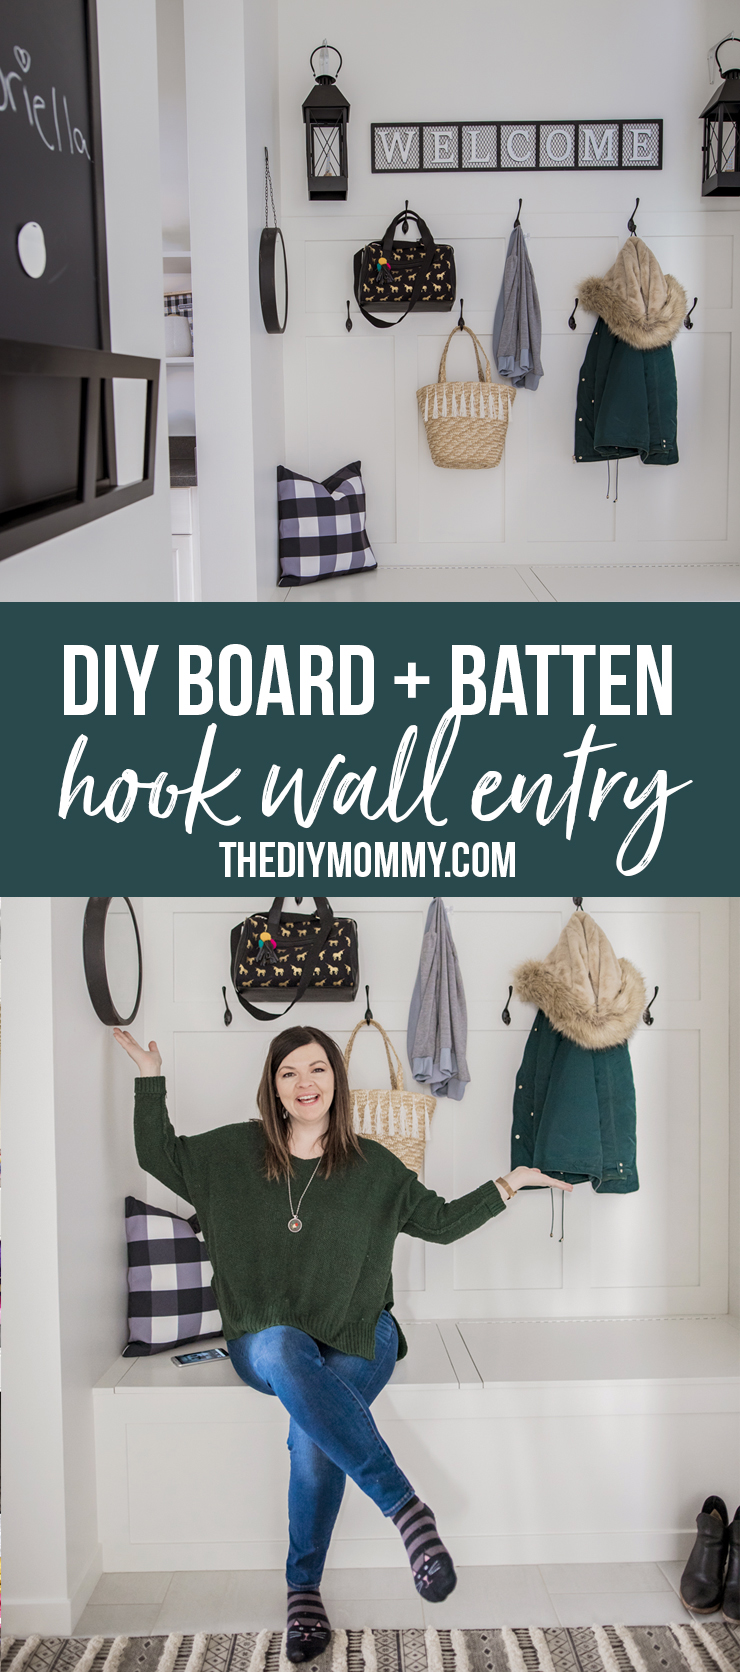 How to Build a Board and Batten Hook Wall Entry